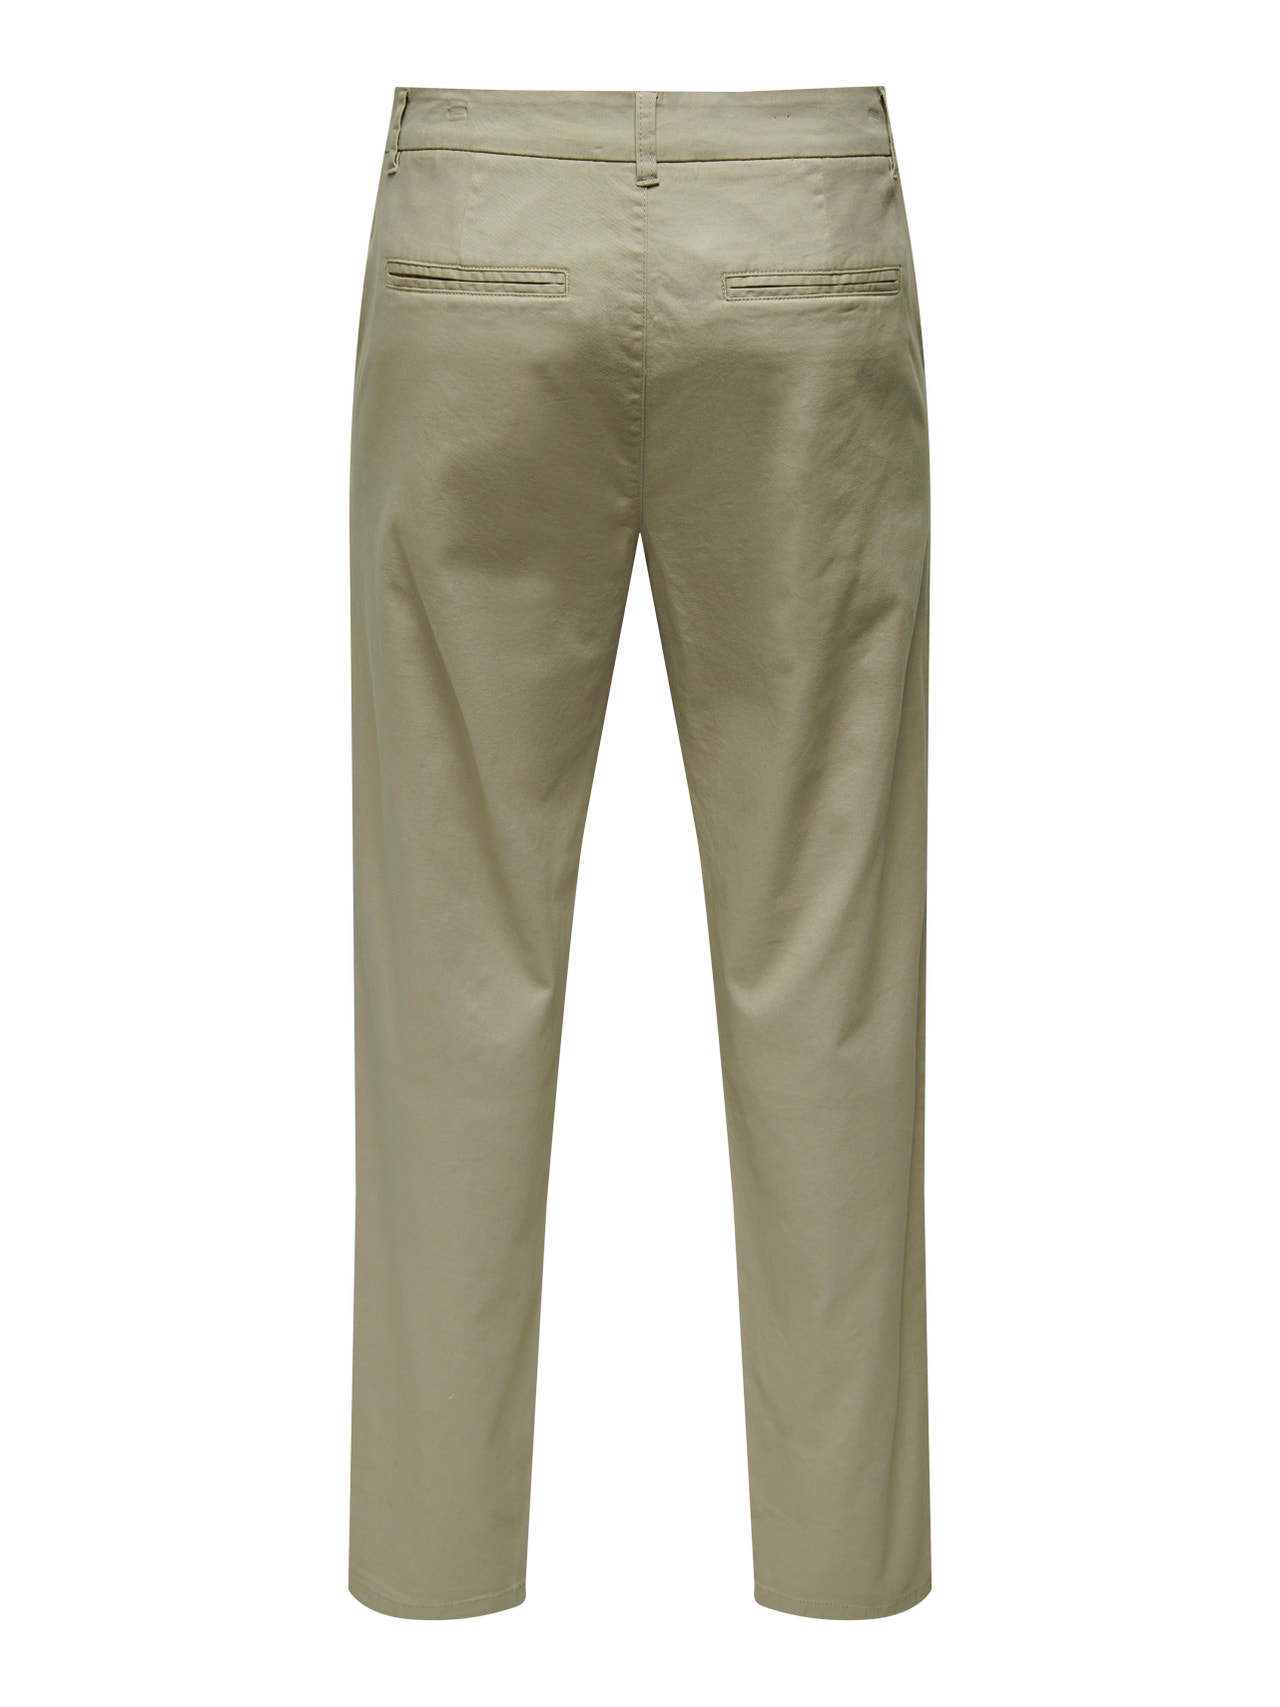 ONLY & SONS Tapered Fit Mid rise Trousers -Crockery - 22026225